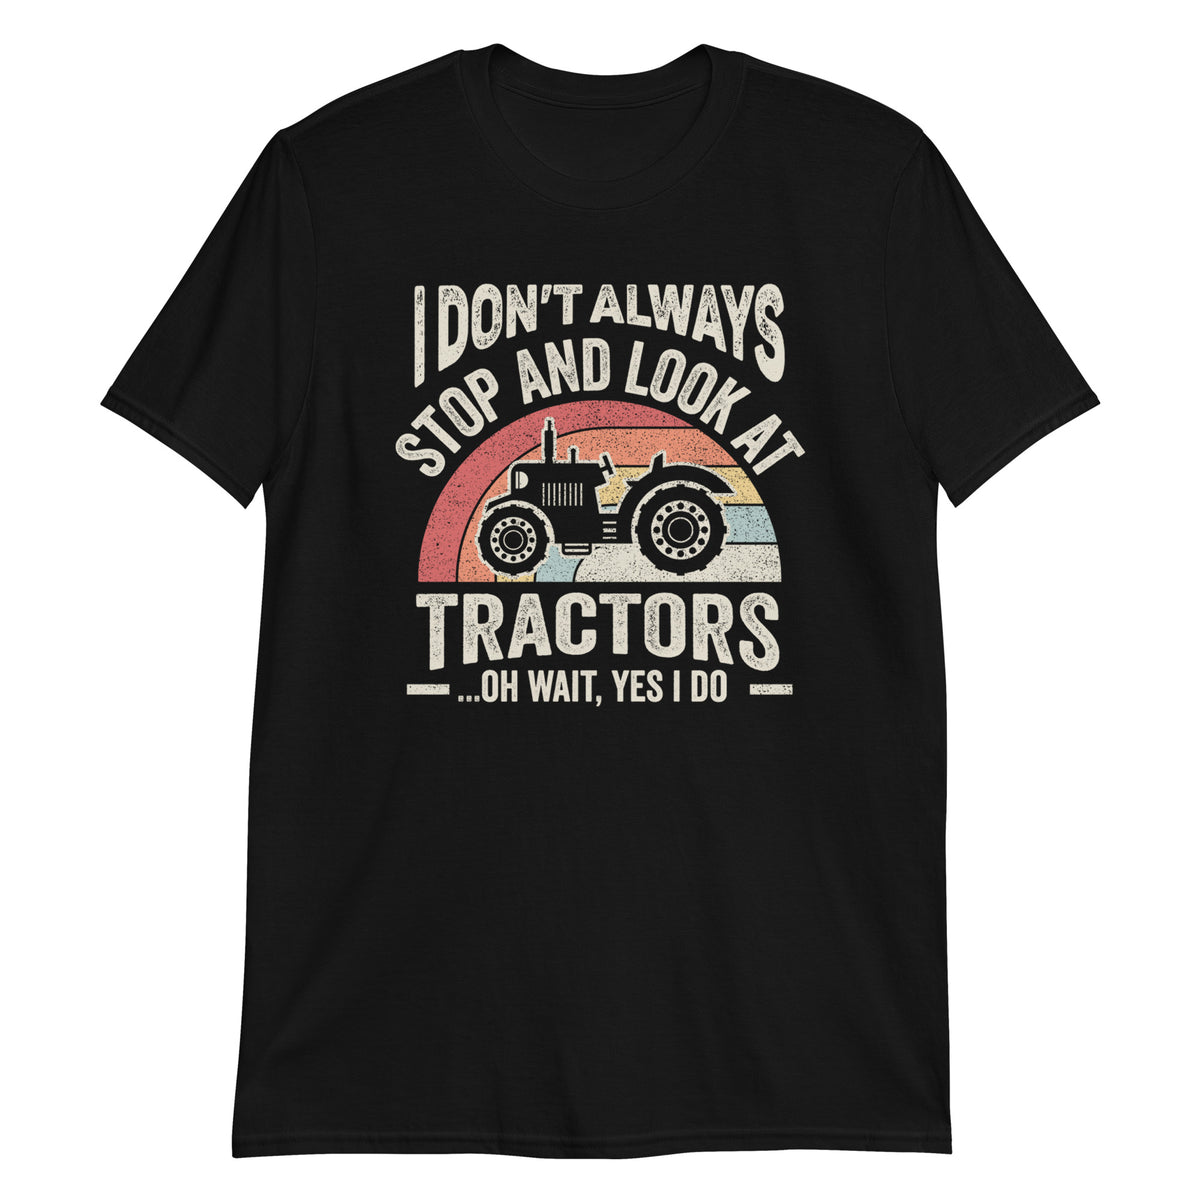 I Don't Always Stop and Look at Tractors T-Shirt